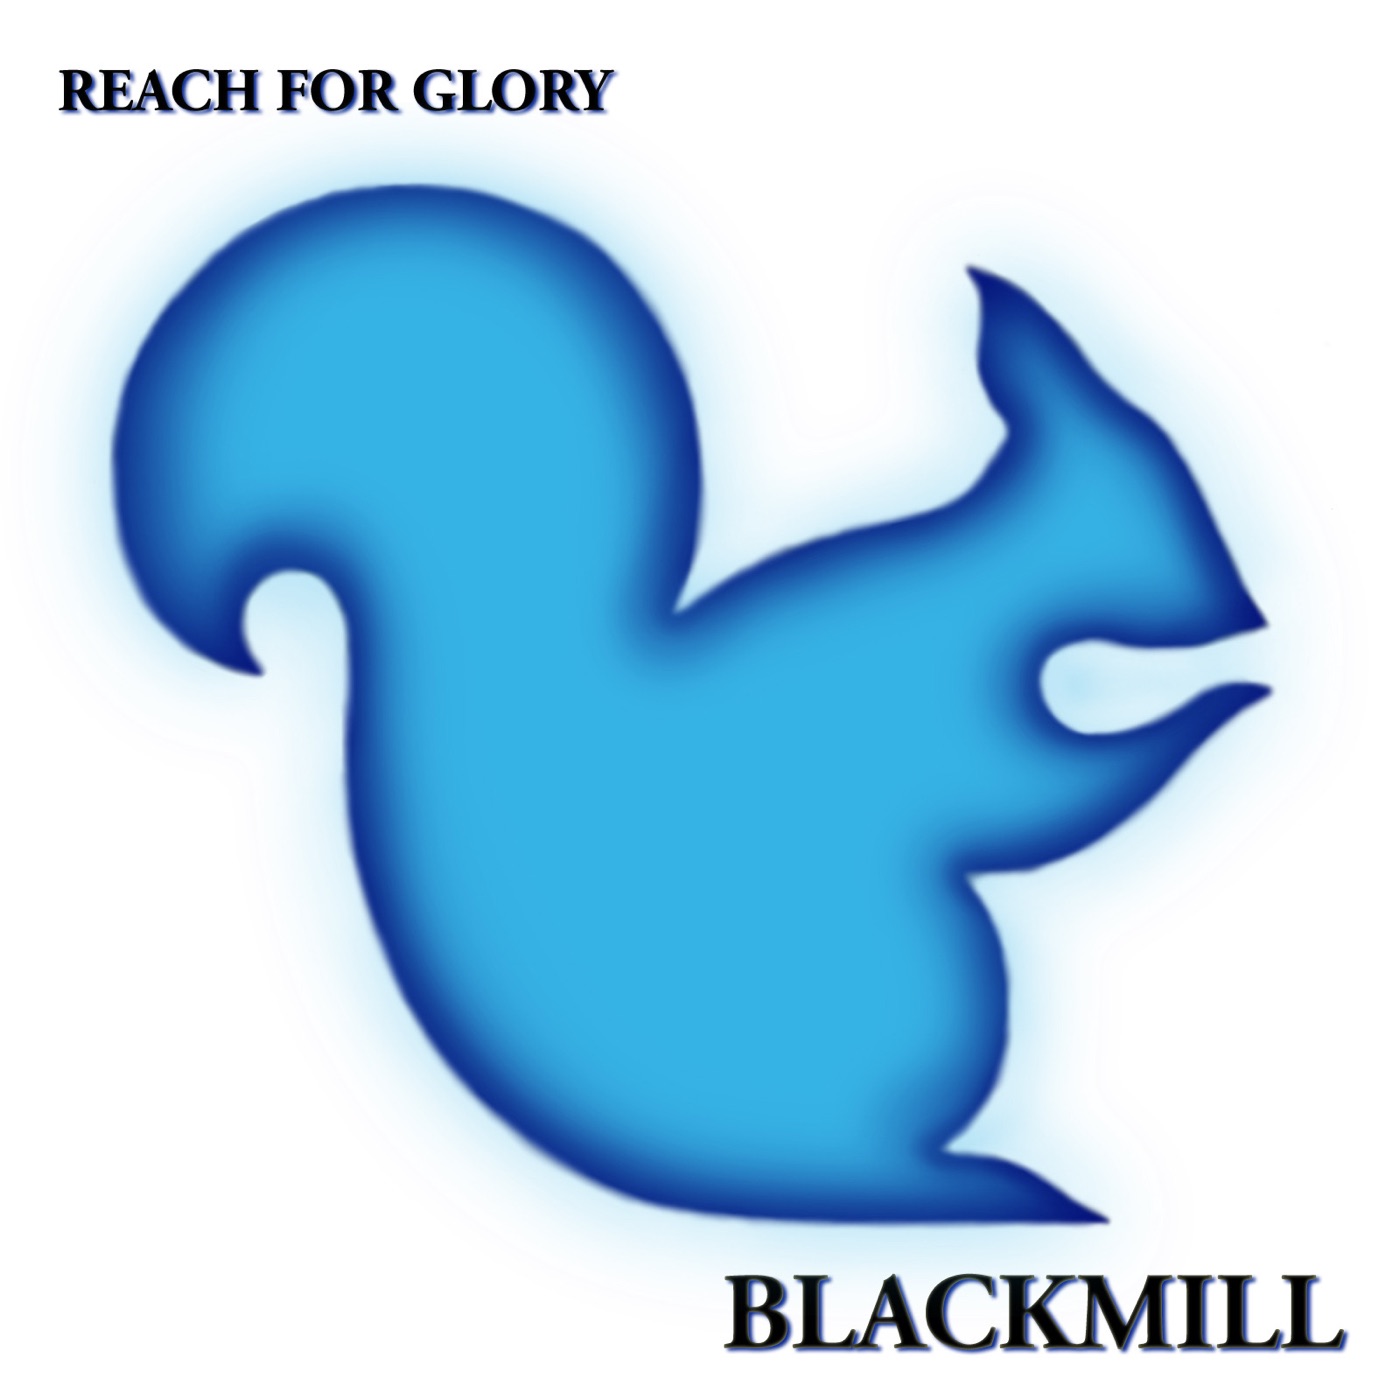 Reach for Glory by Blackmill